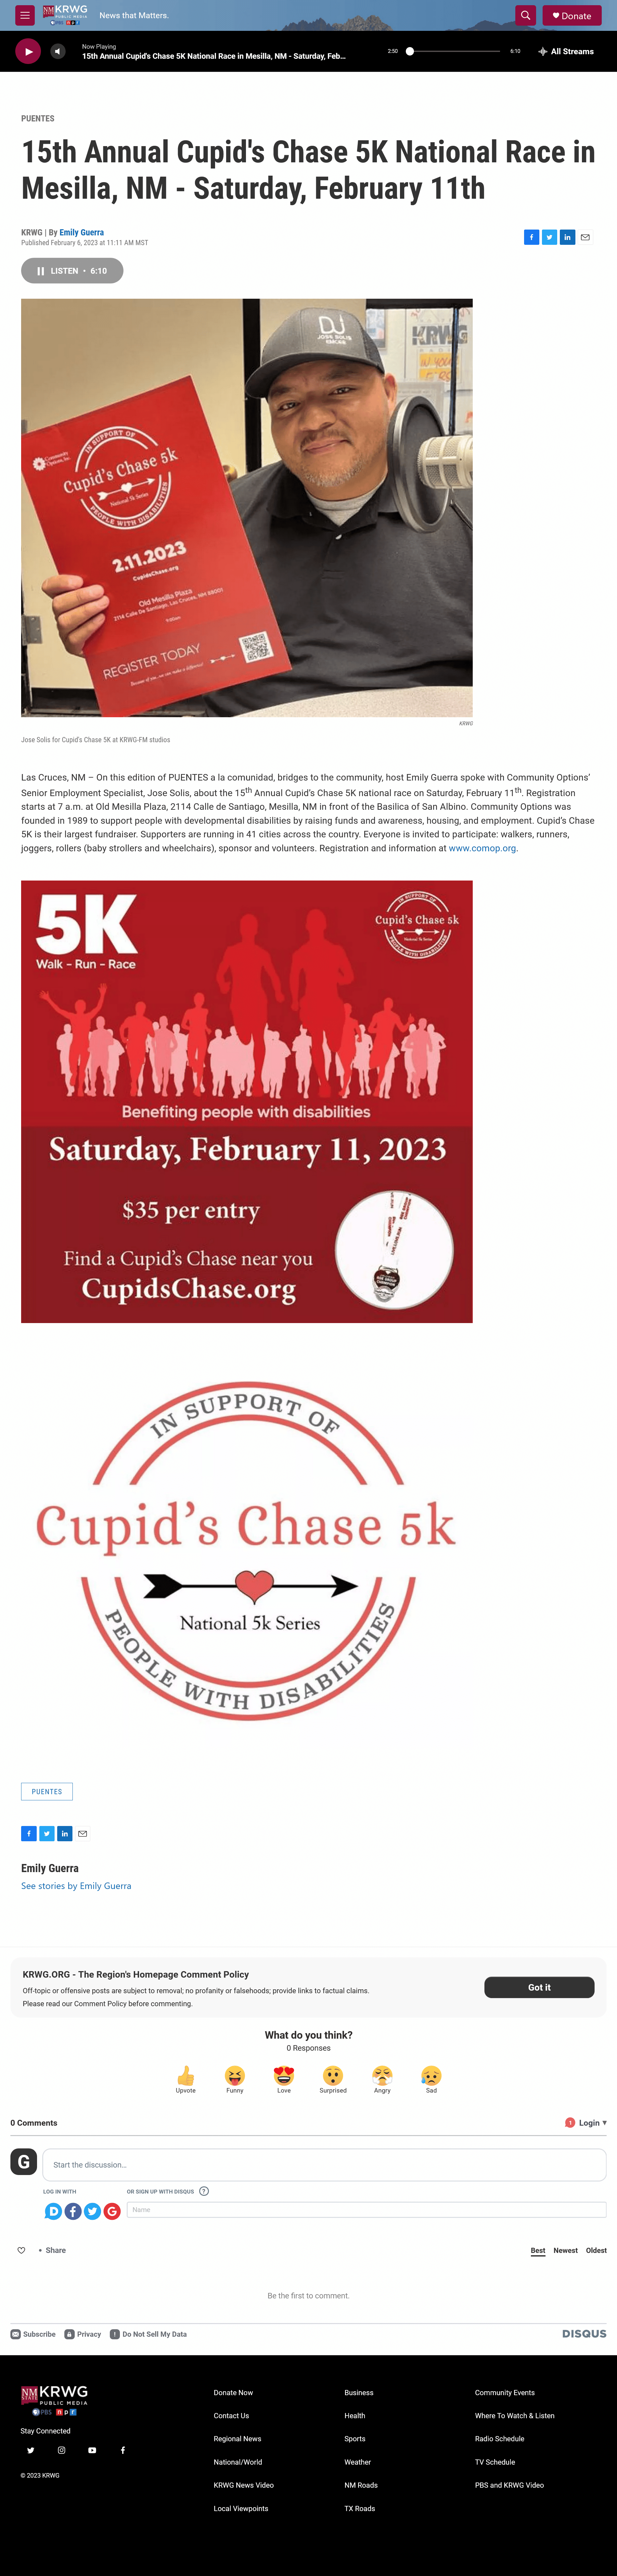 15th Annual Cupid's Chase 5K National Race in Mesilla, NM - Saturday, February 11th - krwg.org